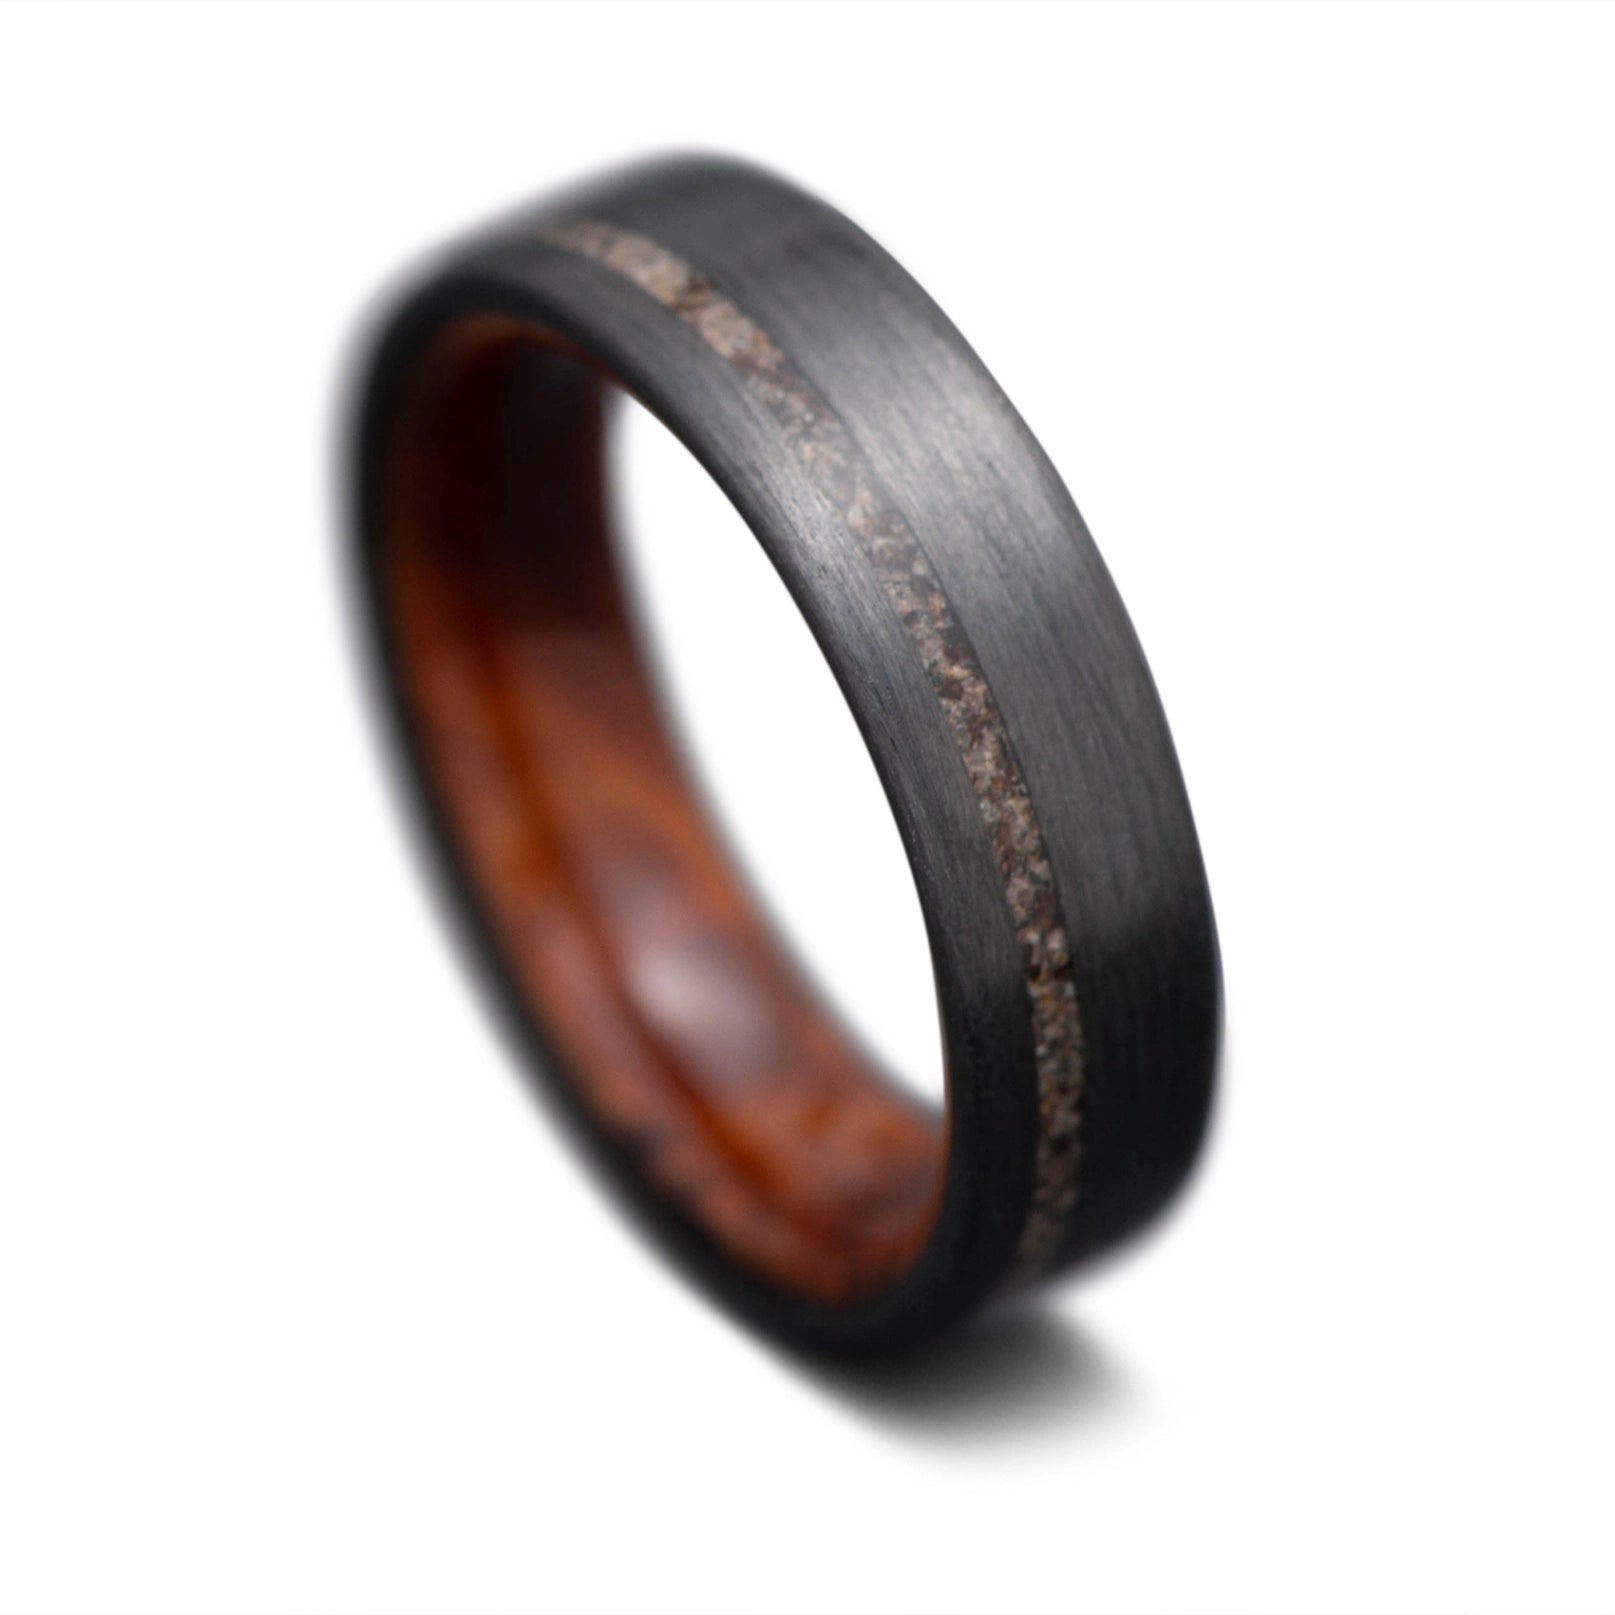  CarbonUni Core Wedding Ring with Crushed T-Rex inlay and Thuya inner sleeve, 5mm -THE VERTEX